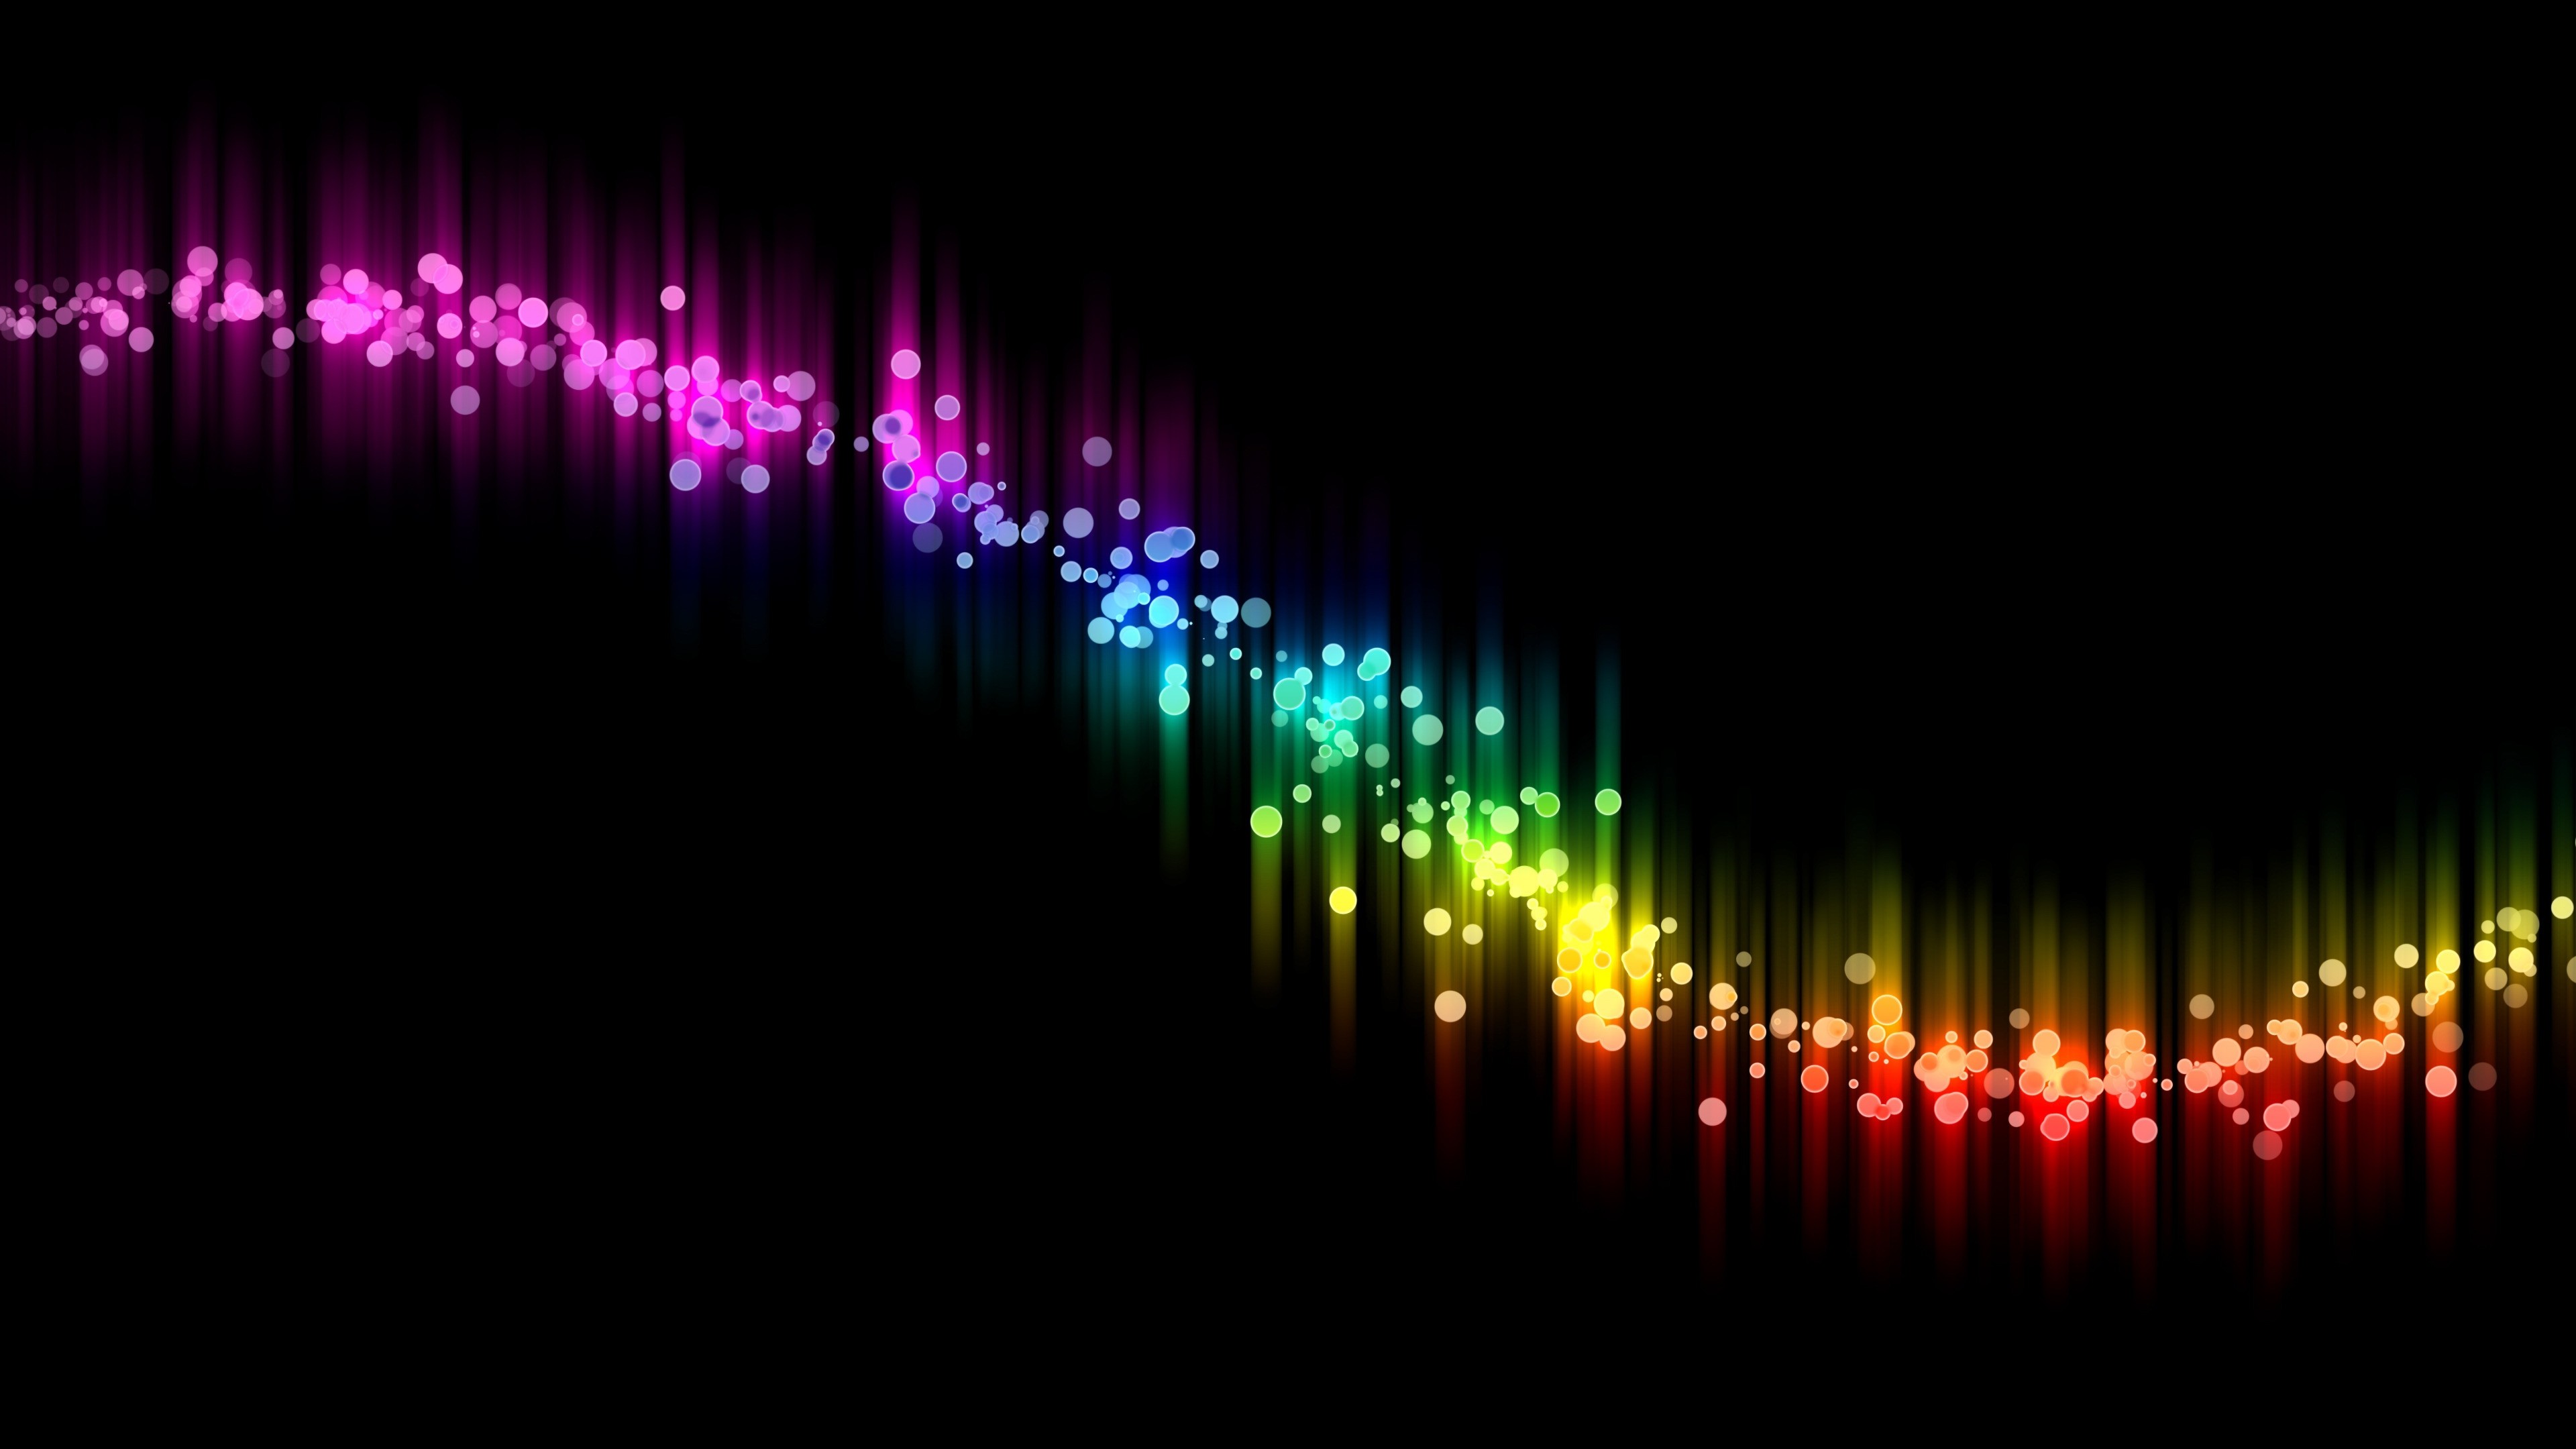 3840x2160 abstract black colorful curve images 4k hd desktop wallpapers cool images hd  download windows colourfull free lovely wallpapers 3840Ã2160 Wallpaper HD